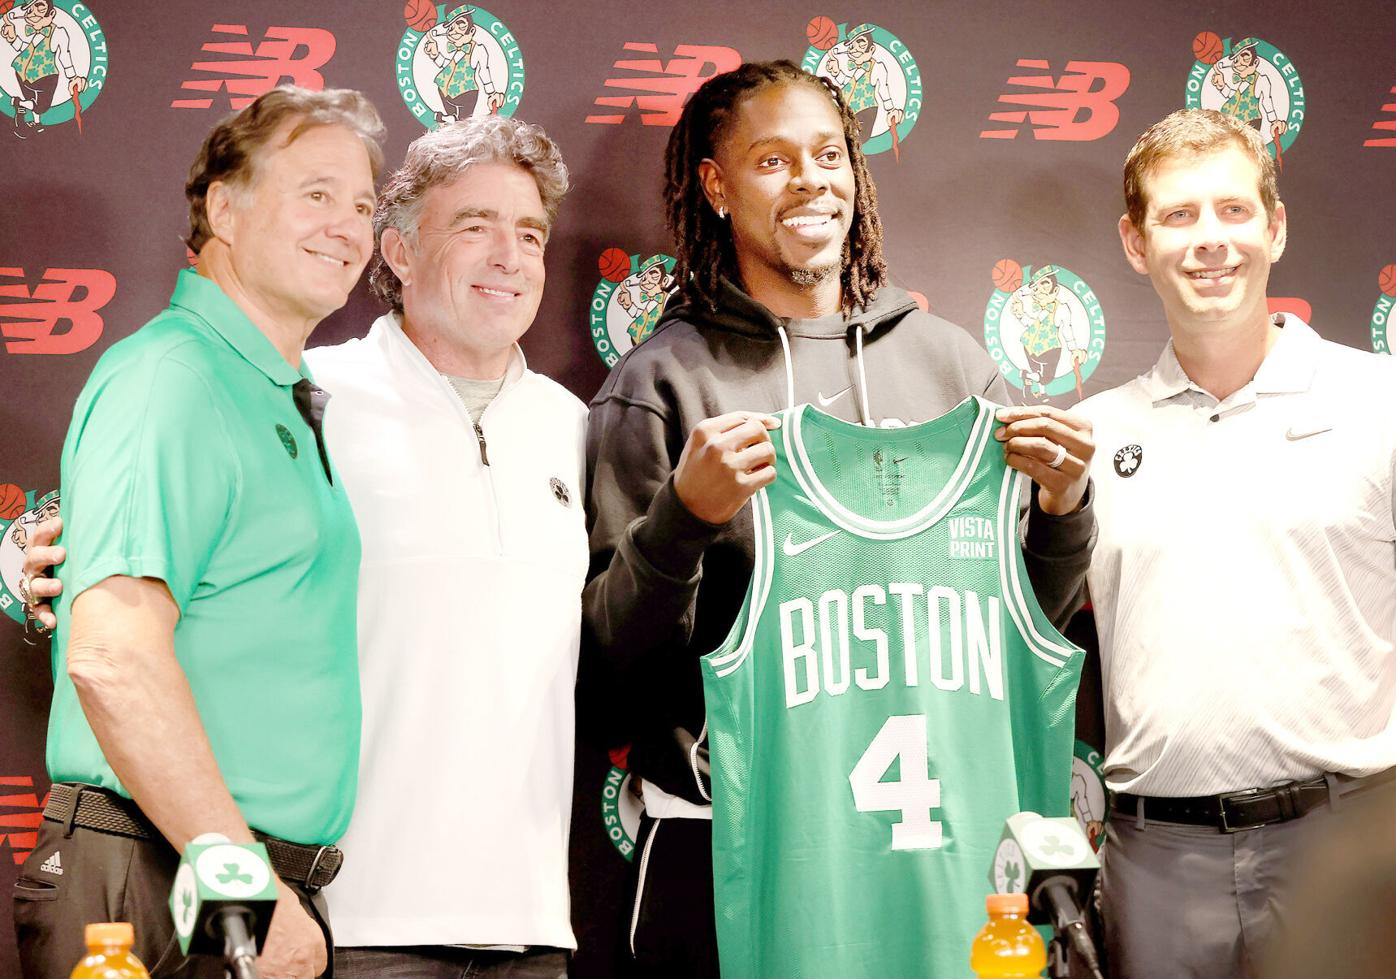 Jrue Holiday reached out to ex-Celtic before choosing new jersey